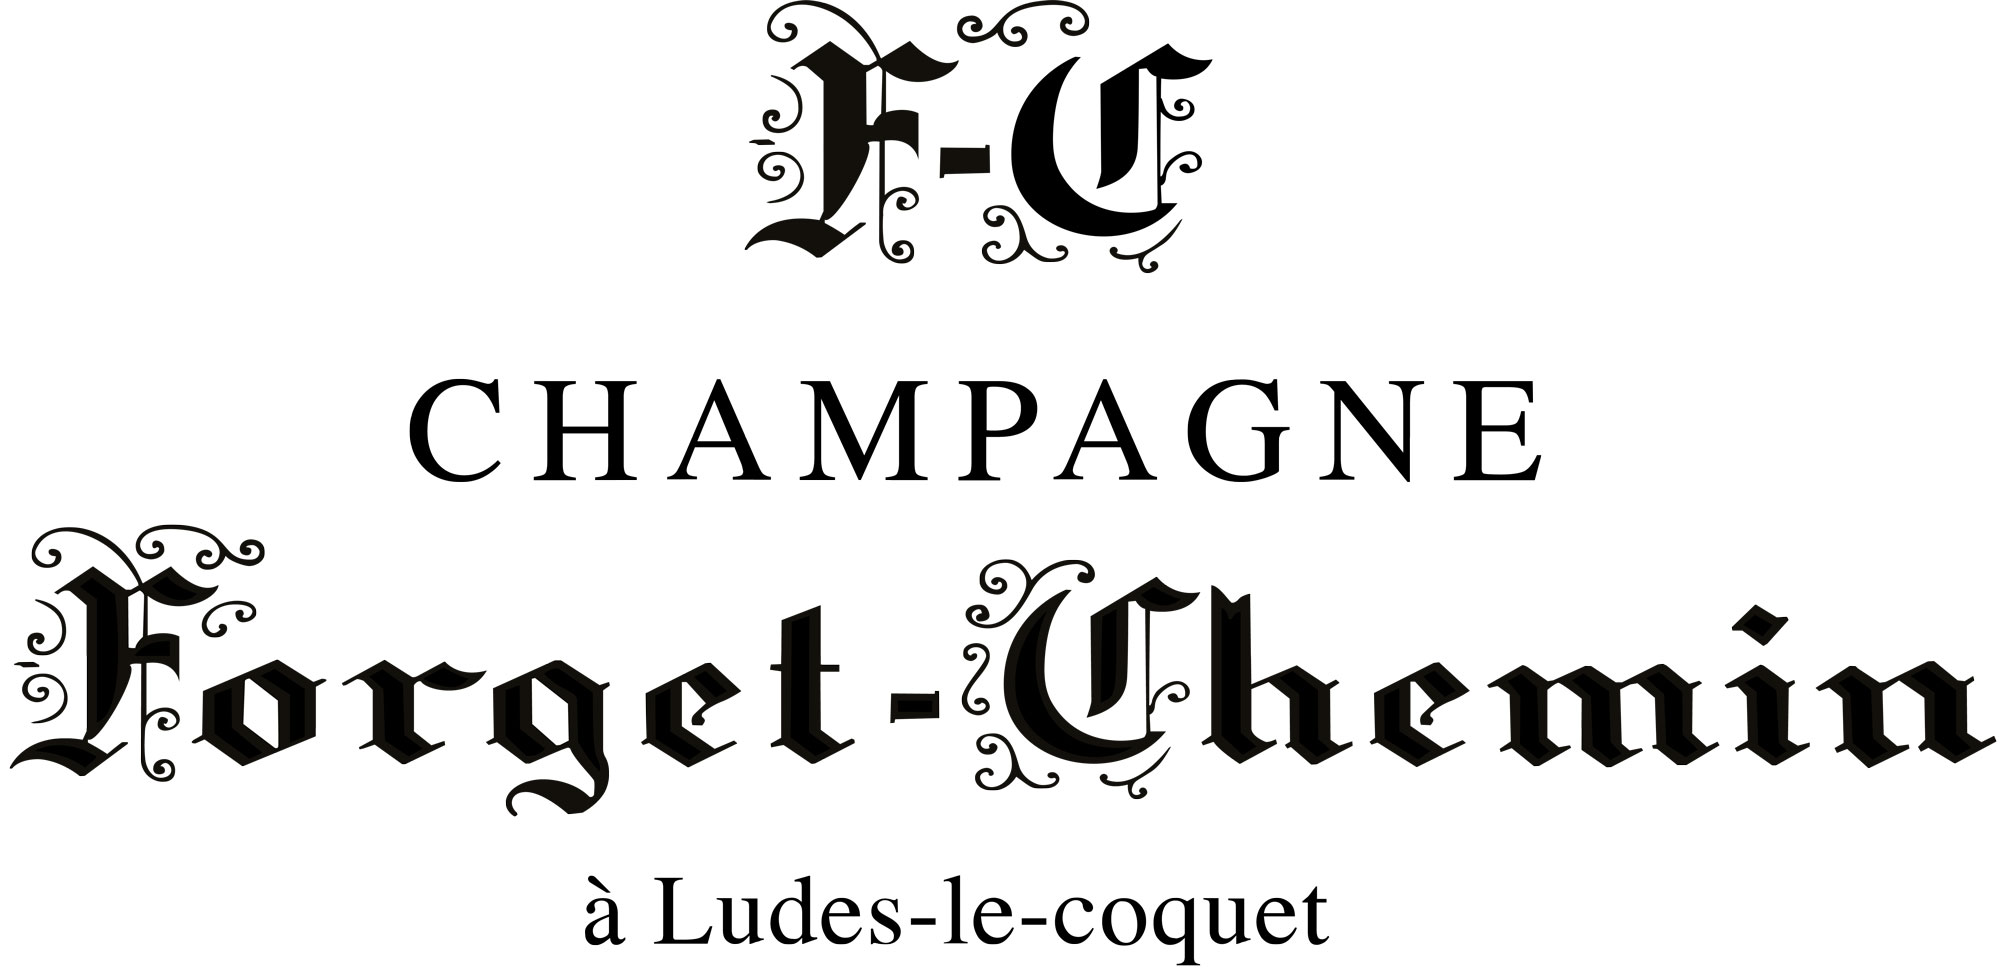 Champagne Forget-Chemin